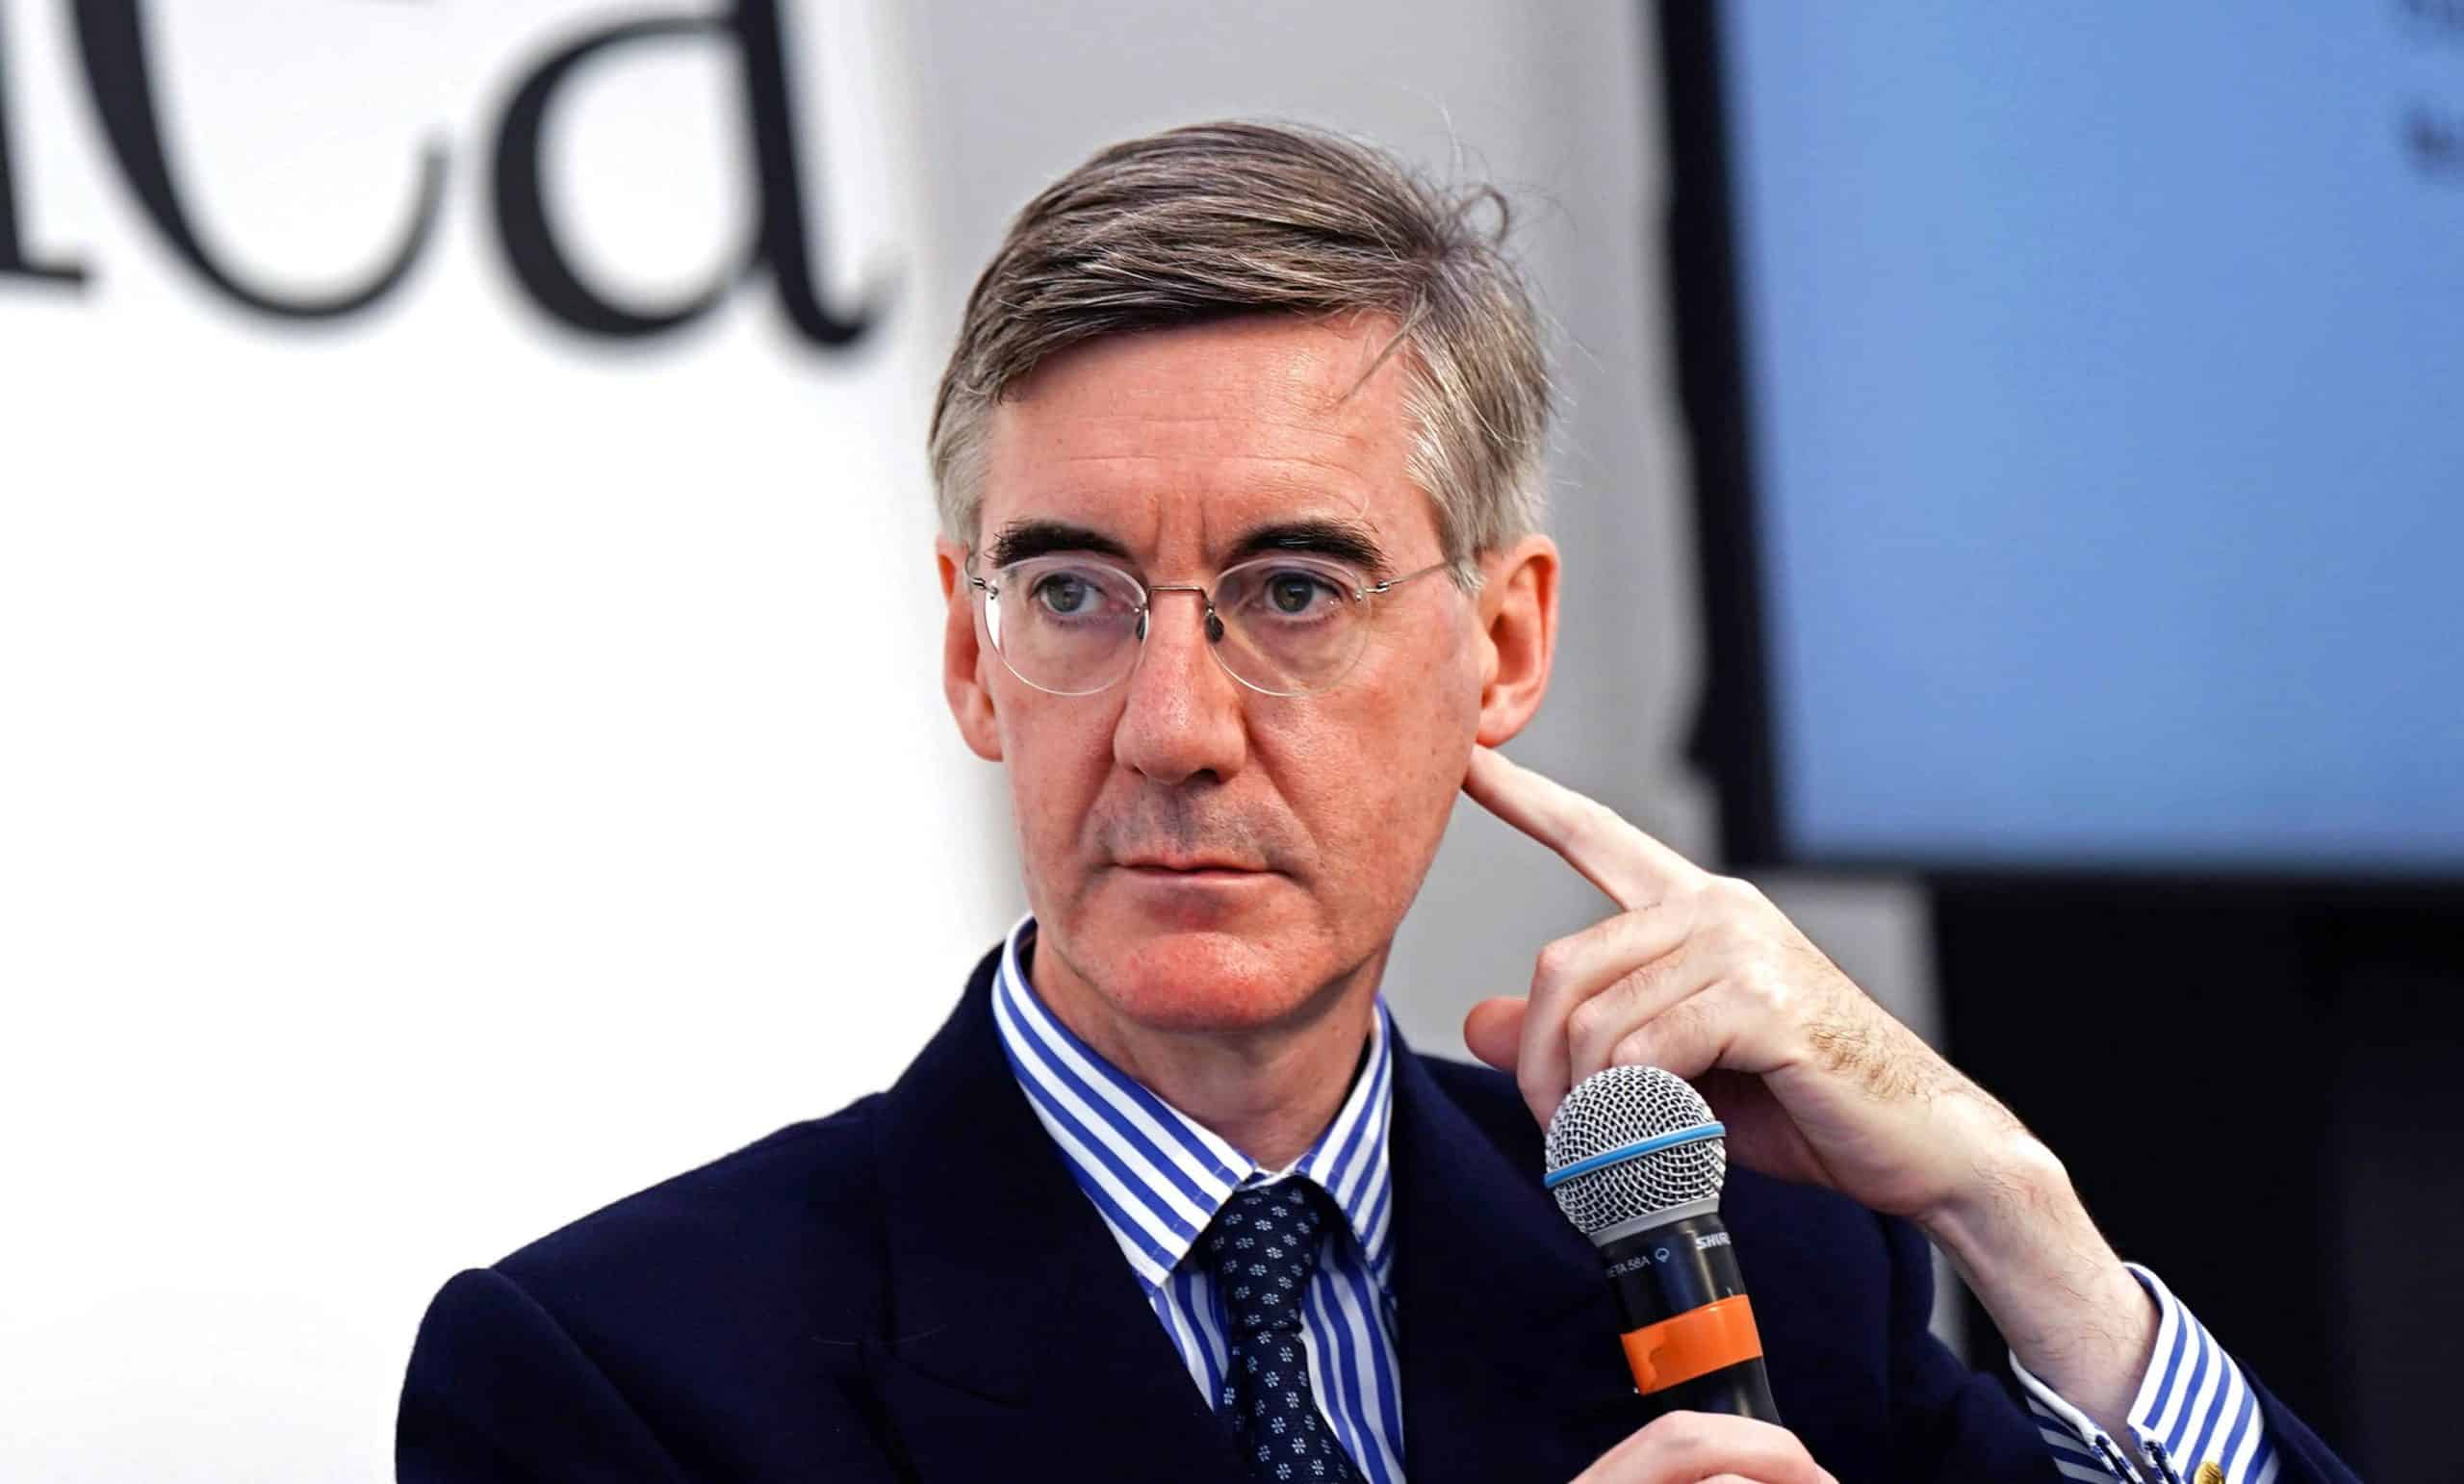 Union boss savages Rees-Mogg with understated sledge